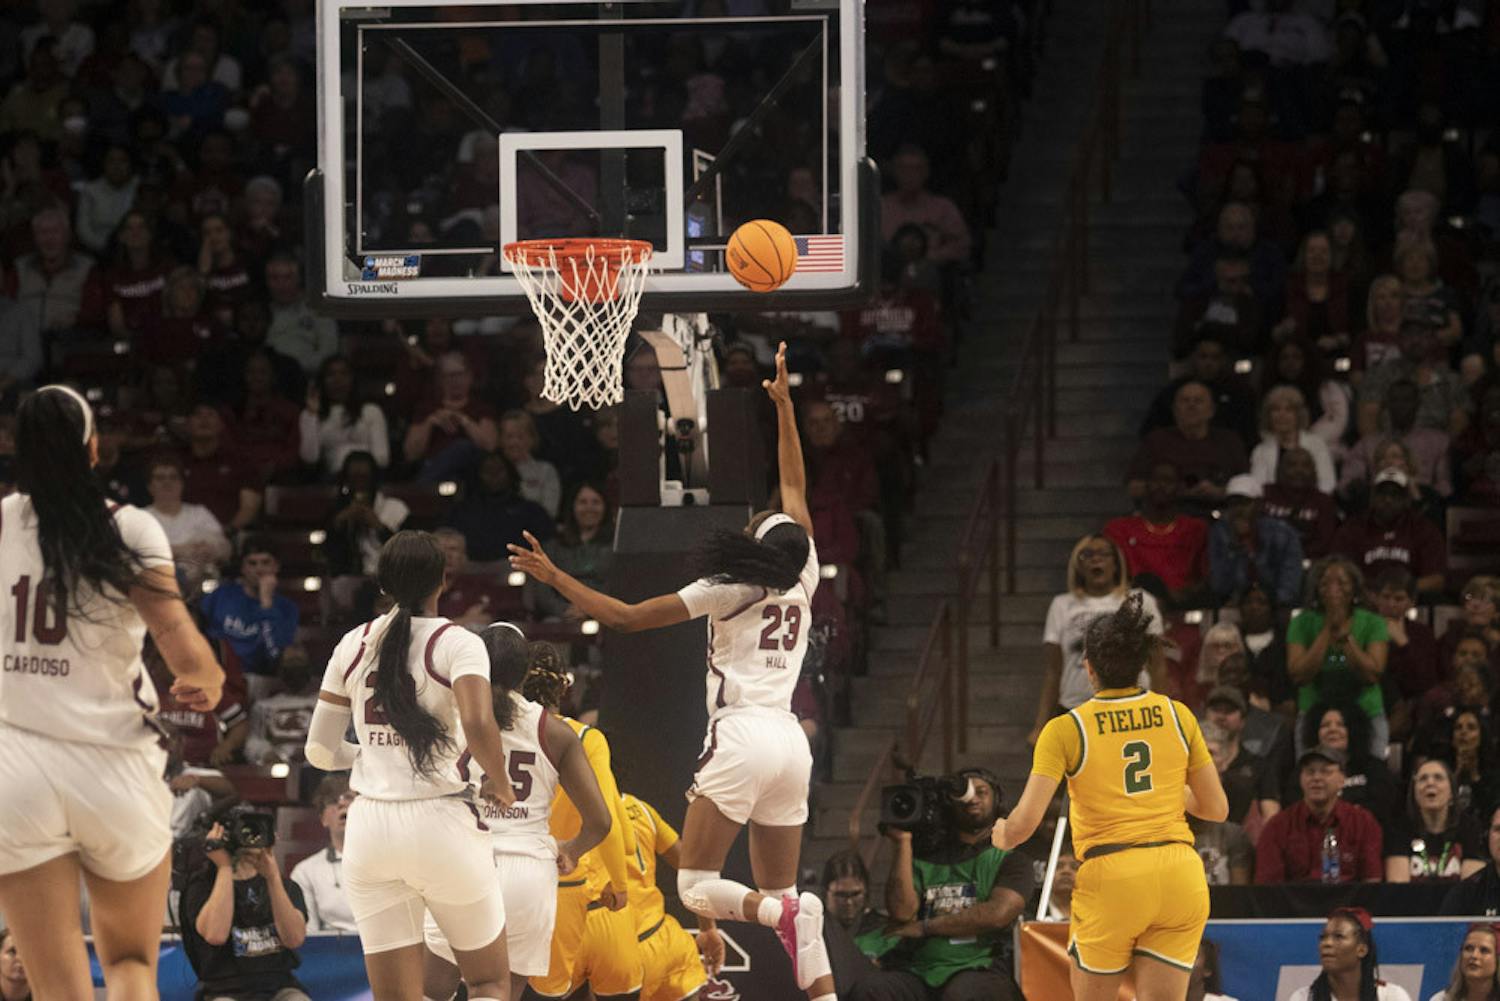 Sophomore guard Bree Hall finishes a layup in the third quarter to putting South Carolina up 47-26 on Norfolk State during the first round of the NCAA tournament on March 17, 2023. Hall finished the game with 6 points as the Gamecocks secured a 72-40 victory.